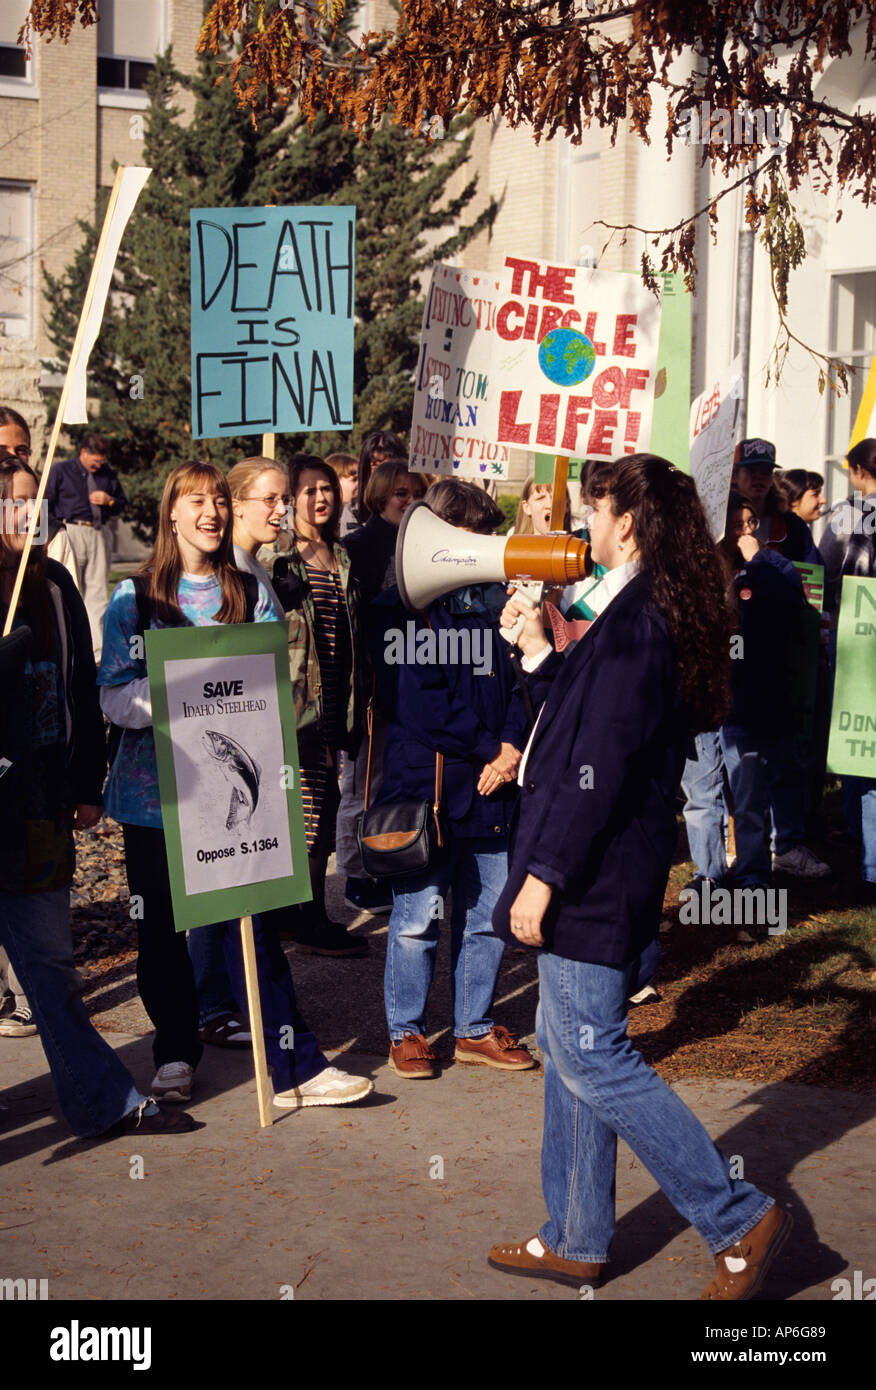 Students stage a demonstration Against Vanishing Ecosystems in Boise Idaho  Stock Photo